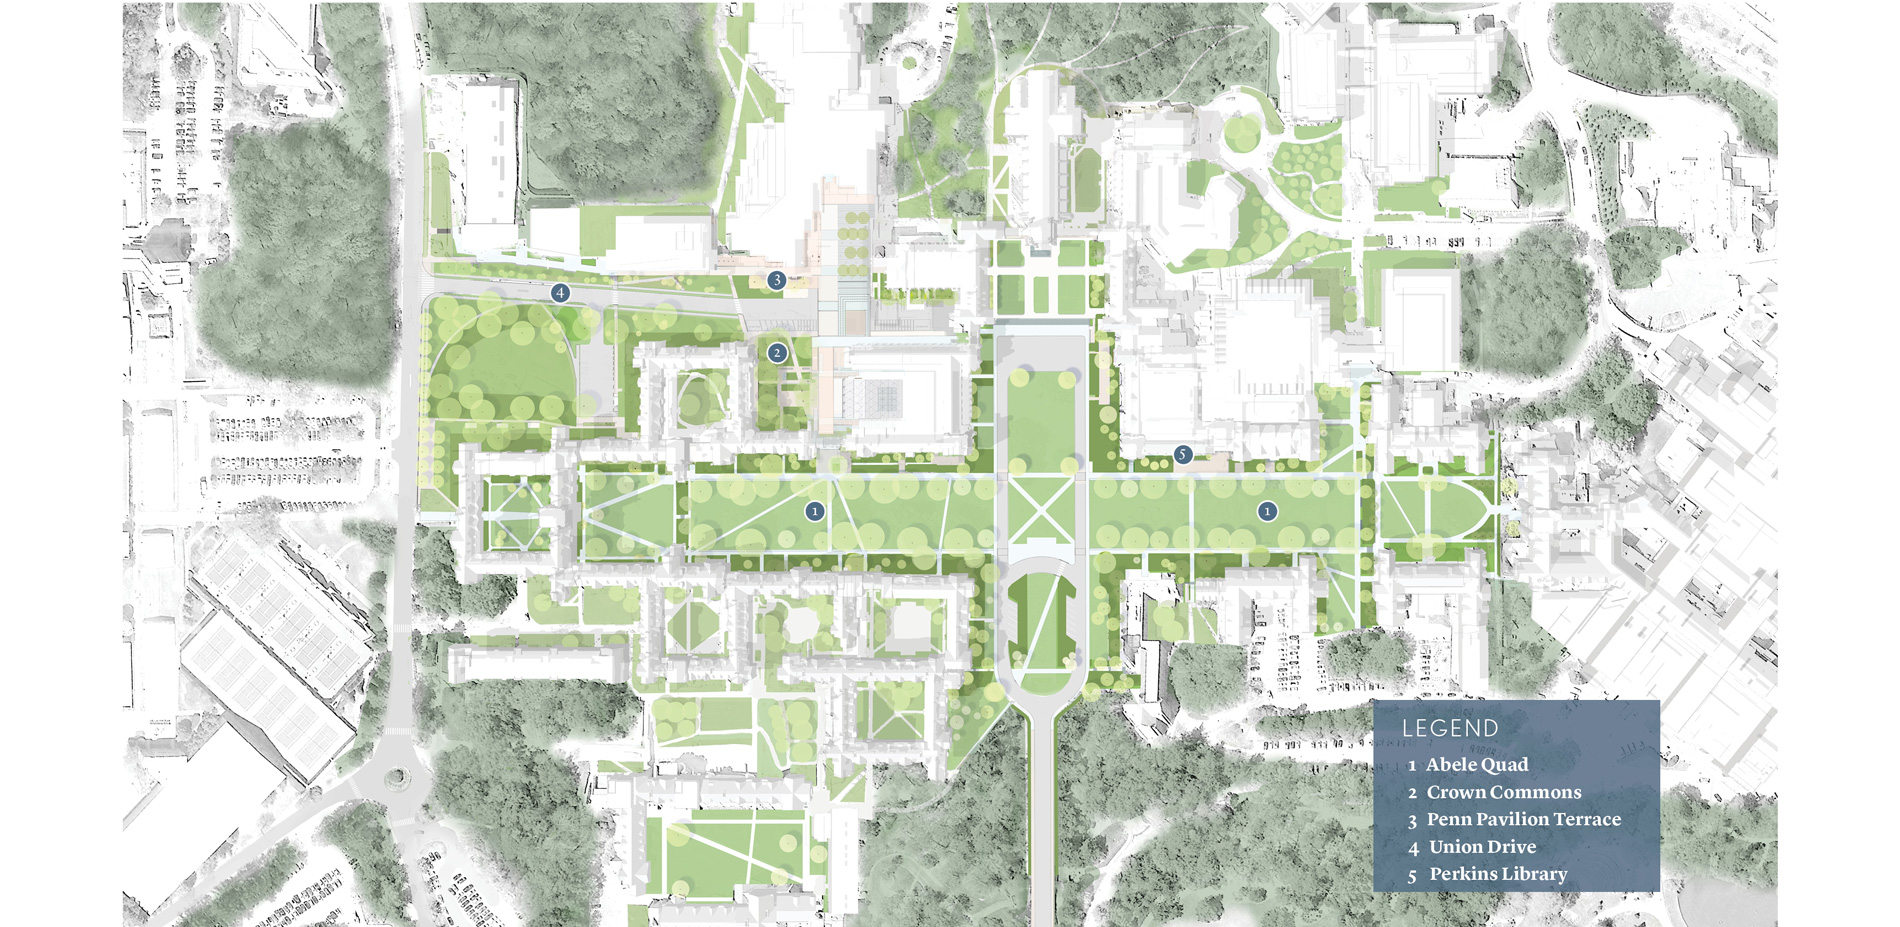 West Quad has evolved from its self-contained cruciform plan into a complex campus woven with its surrounding woodland.…